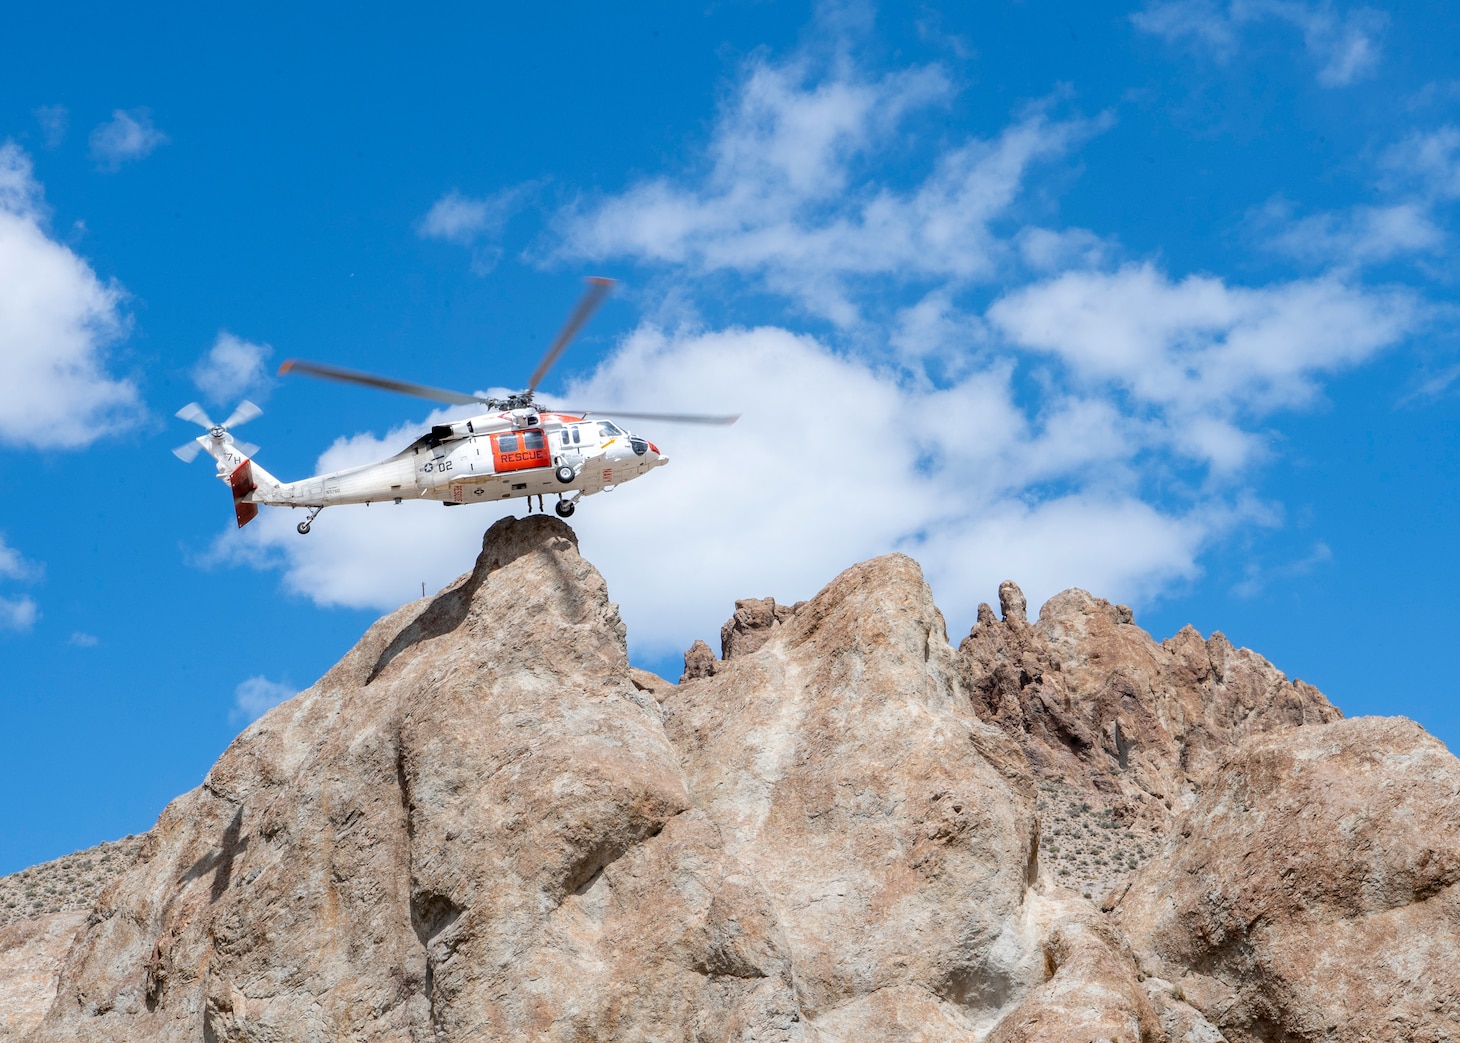 An MH-60S Knighthawk helicopter, assigned to the "Longhorns" of Helicopter Search and Rescue (SAR) Squadron, conducts a one wheel during a simulated SAR training exercise.